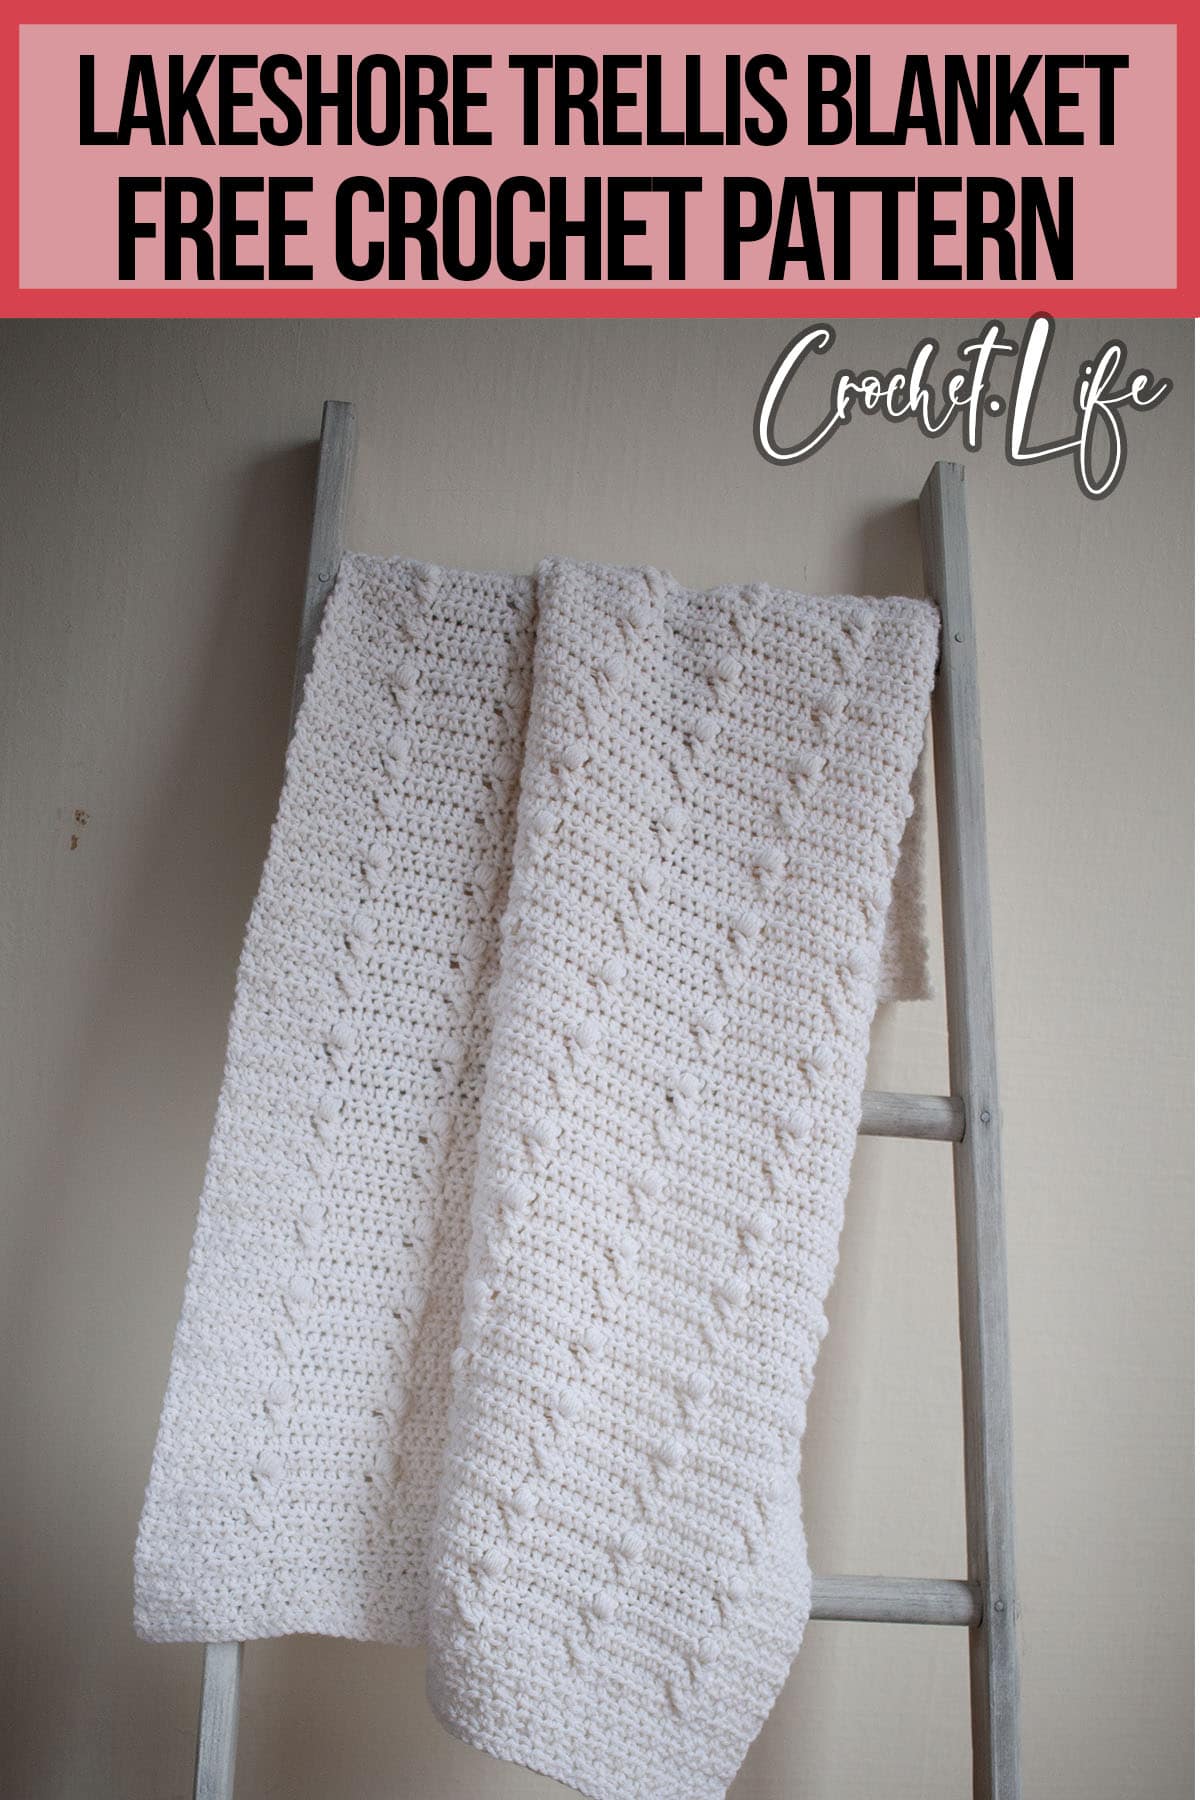 crochet pattern for a baby blanket with text which reads lakeshore trellis blanket free crochet pattern